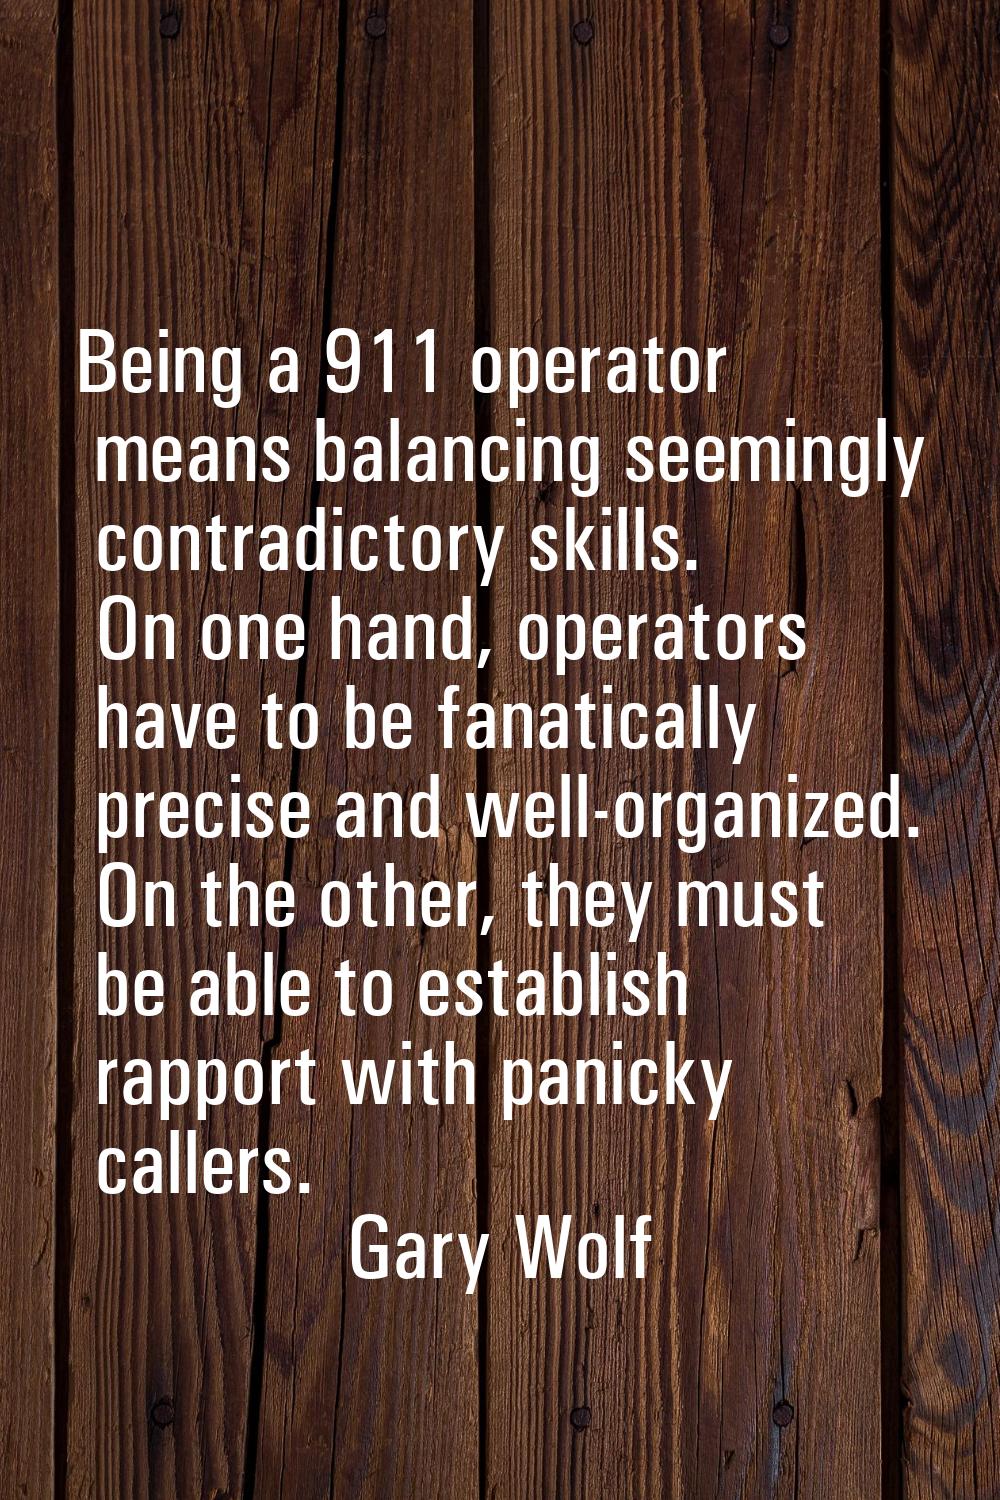 Being a 911 operator means balancing seemingly contradictory skills. On one hand, operators have to